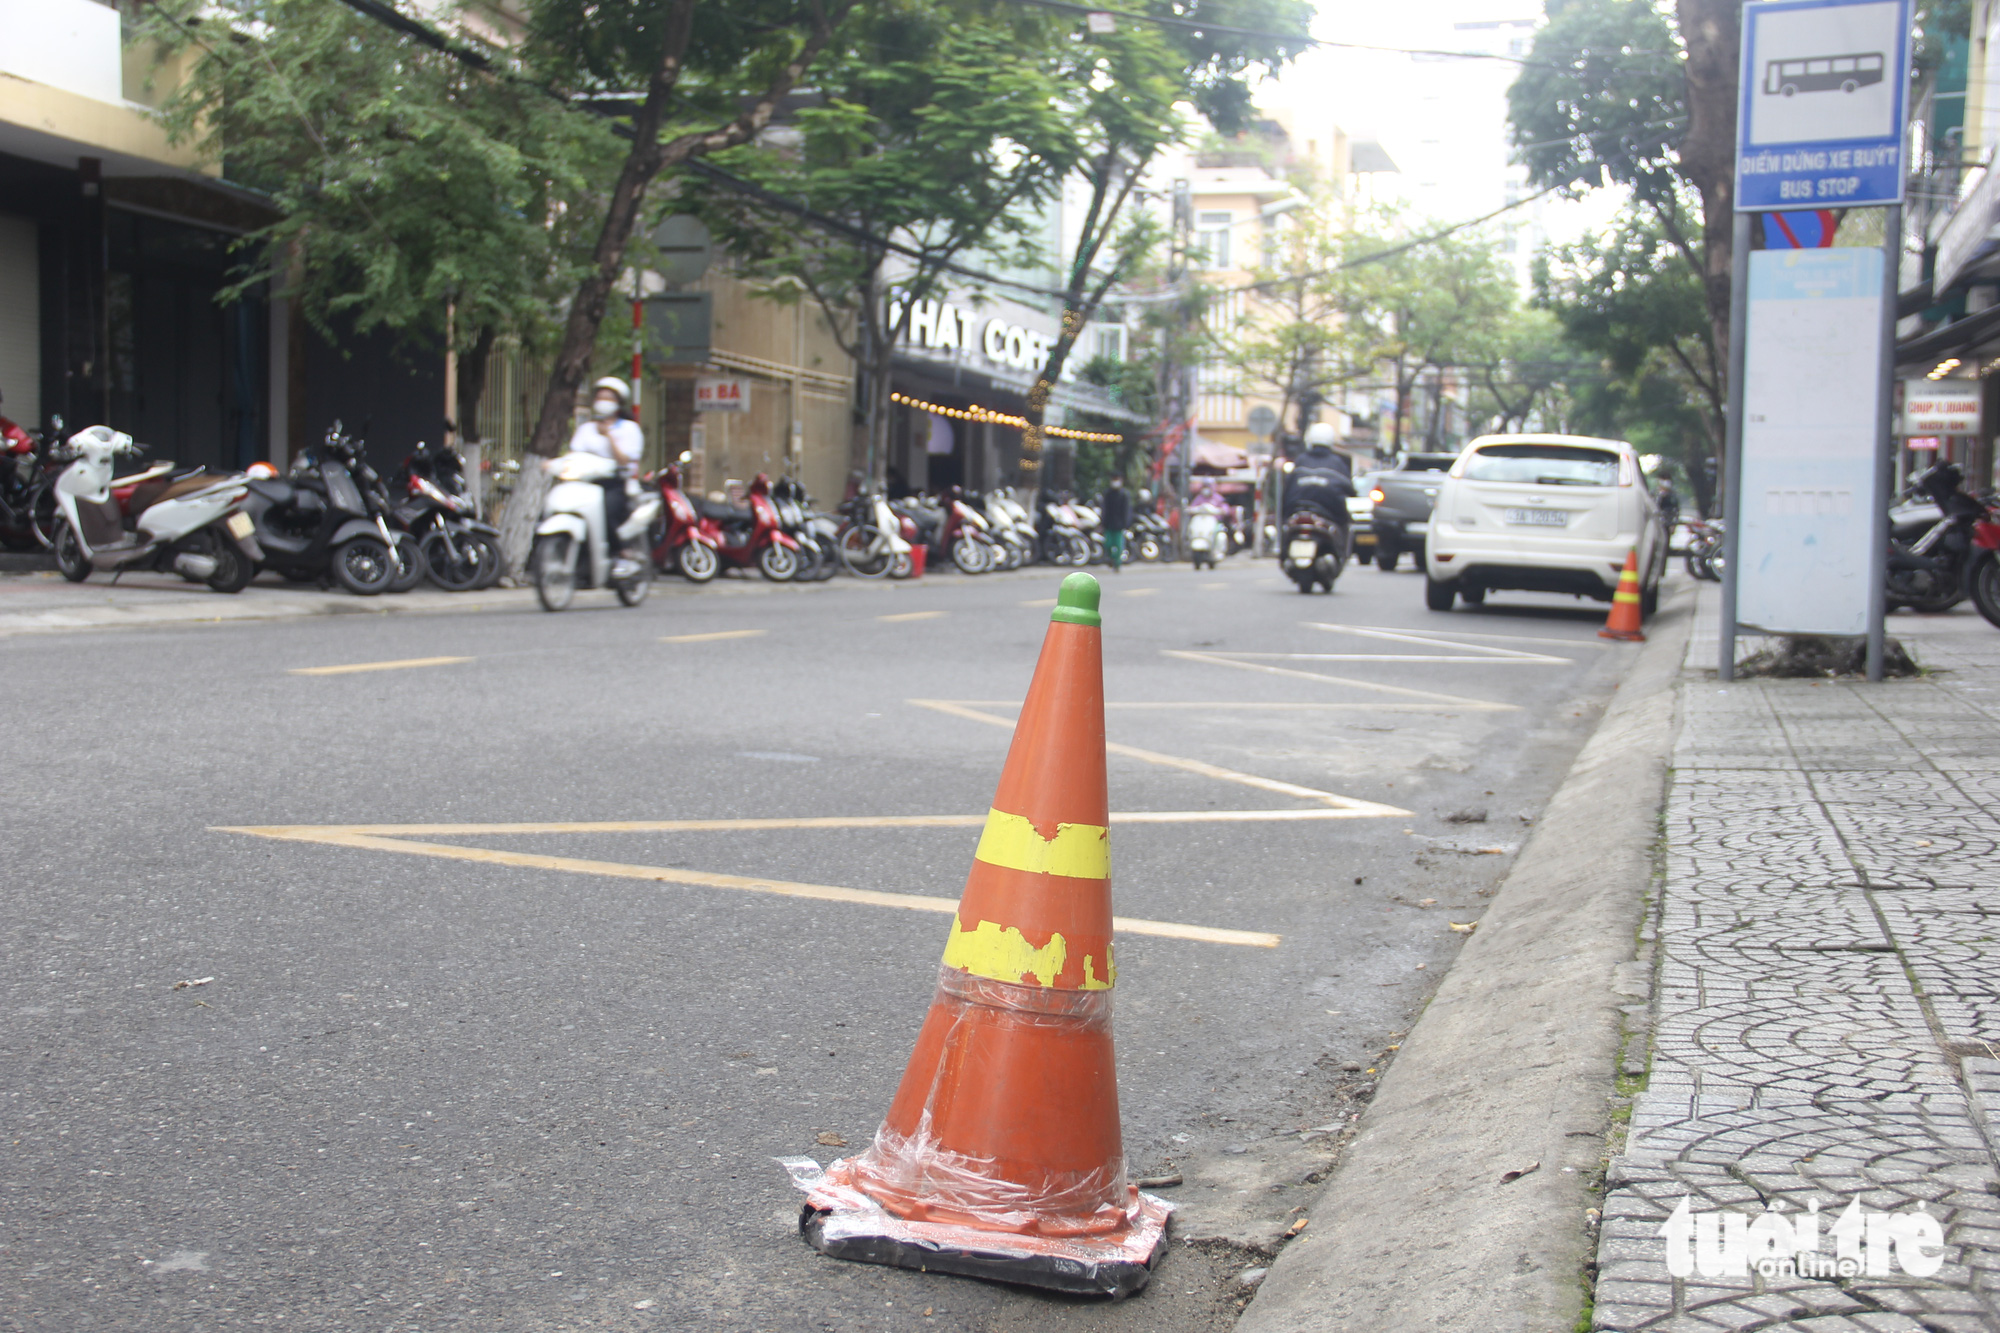 A traffic cone is placed near a bus stop on Hai Phong Street in Hai Chau District, Da Nang City to prevent drivers from parking cars. Photo: Truong Trung / Tuoi Tre